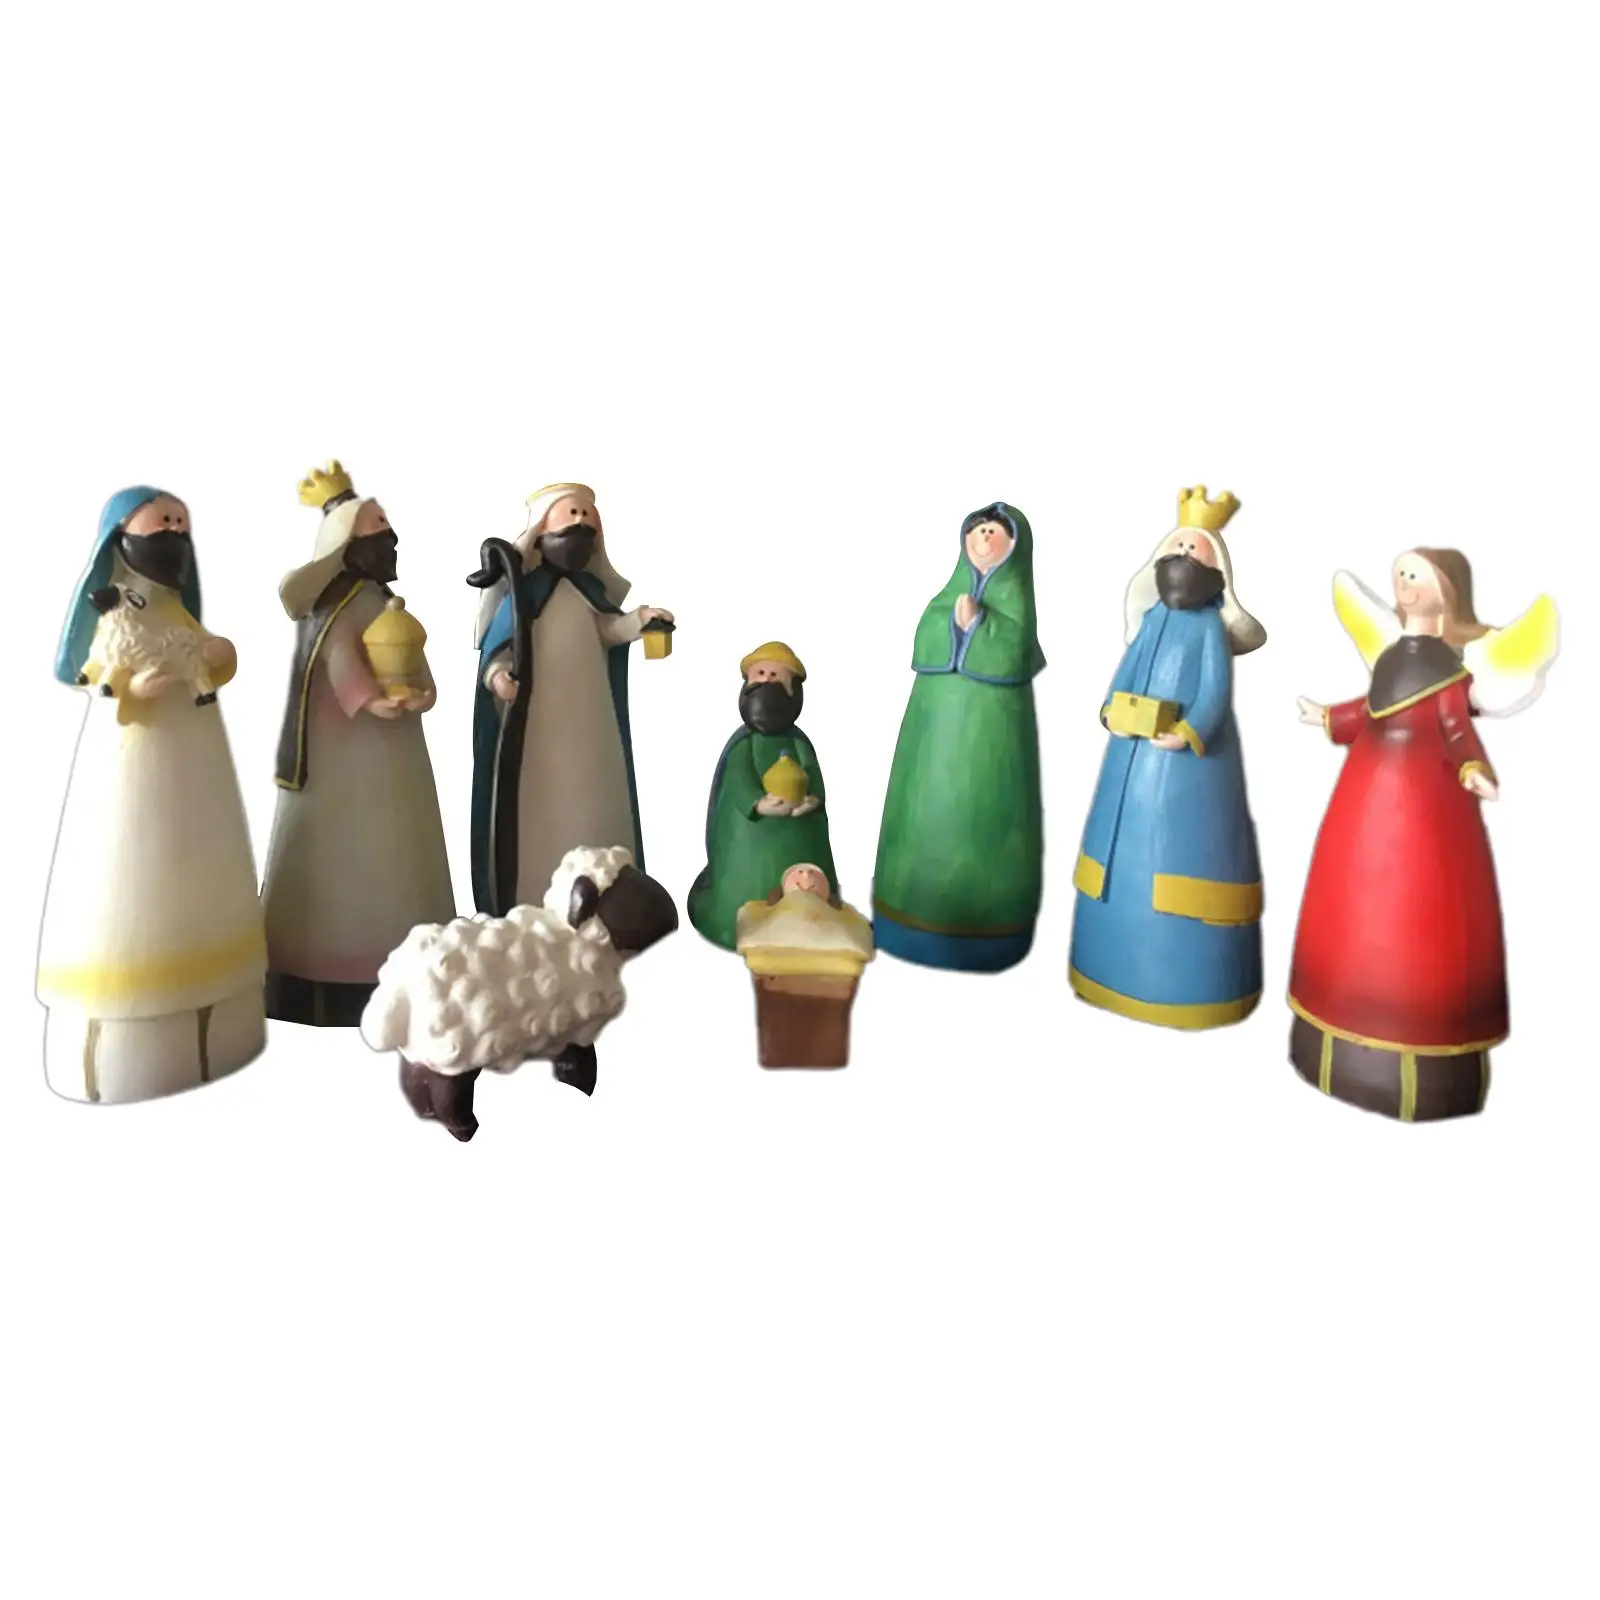 9 Pieces Nativity Scene Manger Figurines Set Christmas Ornament for Tabletop